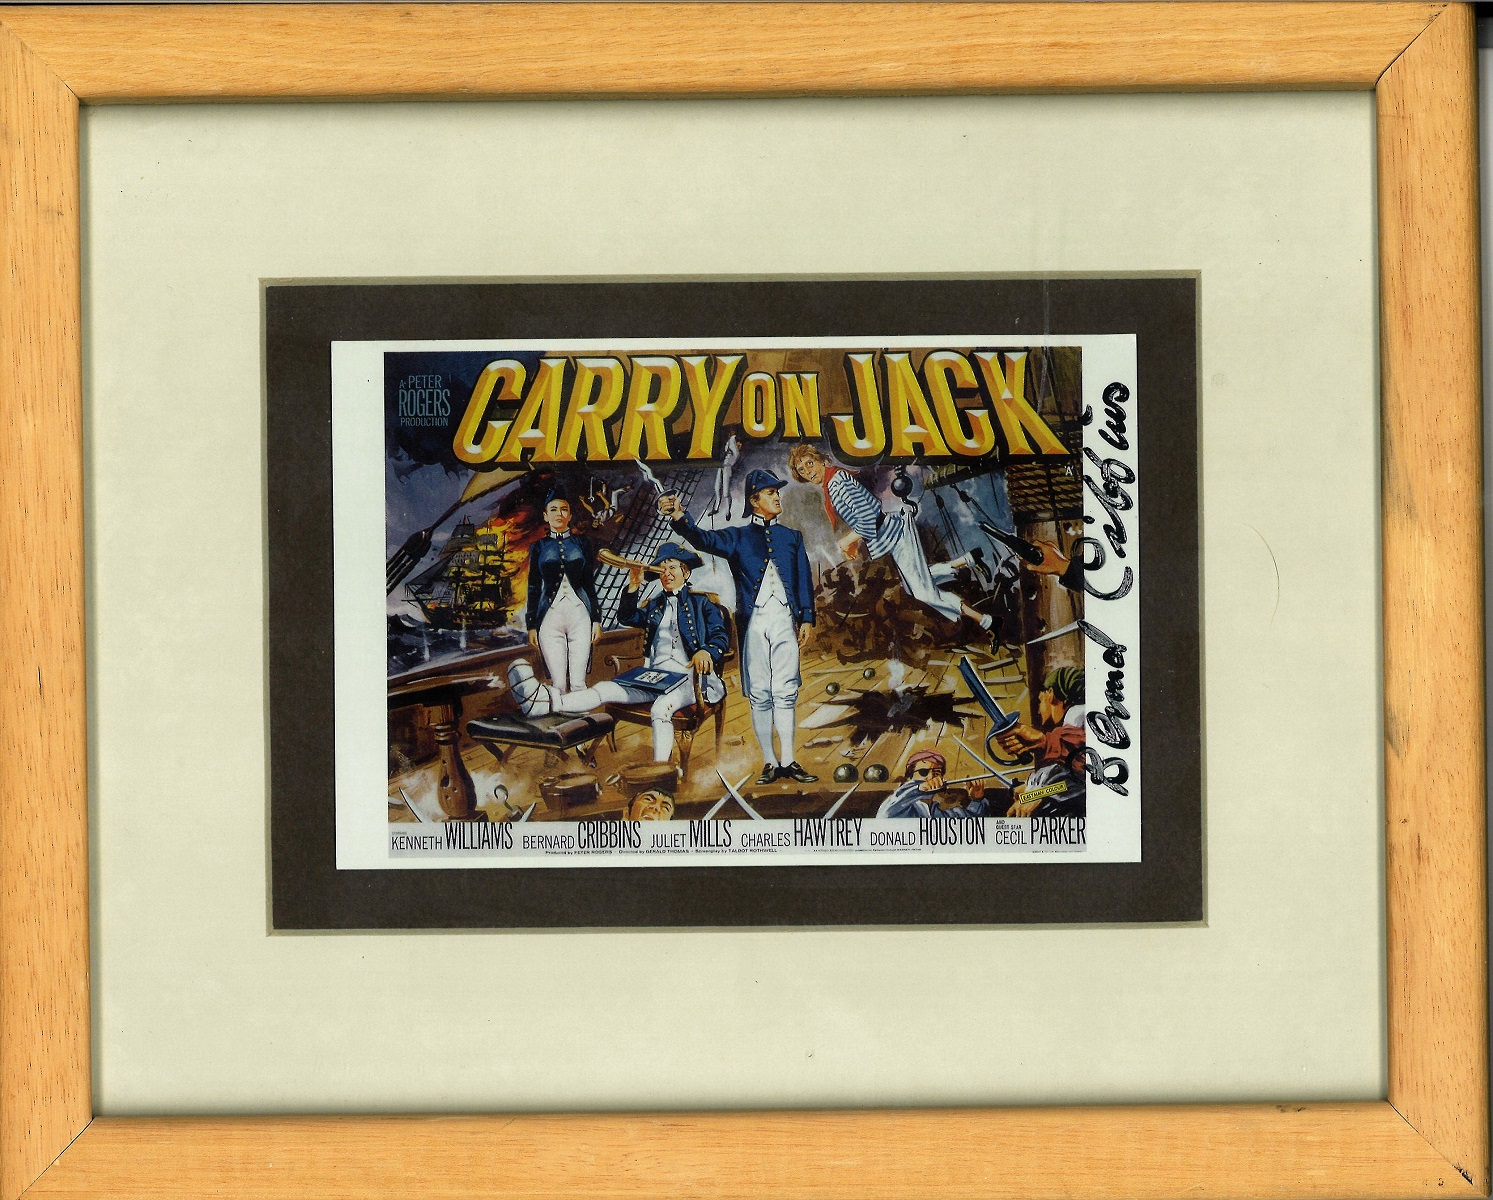 Bernard Cribbins signed Carry on Jack postcard framed and mounted to approx. 10 x 8 inches